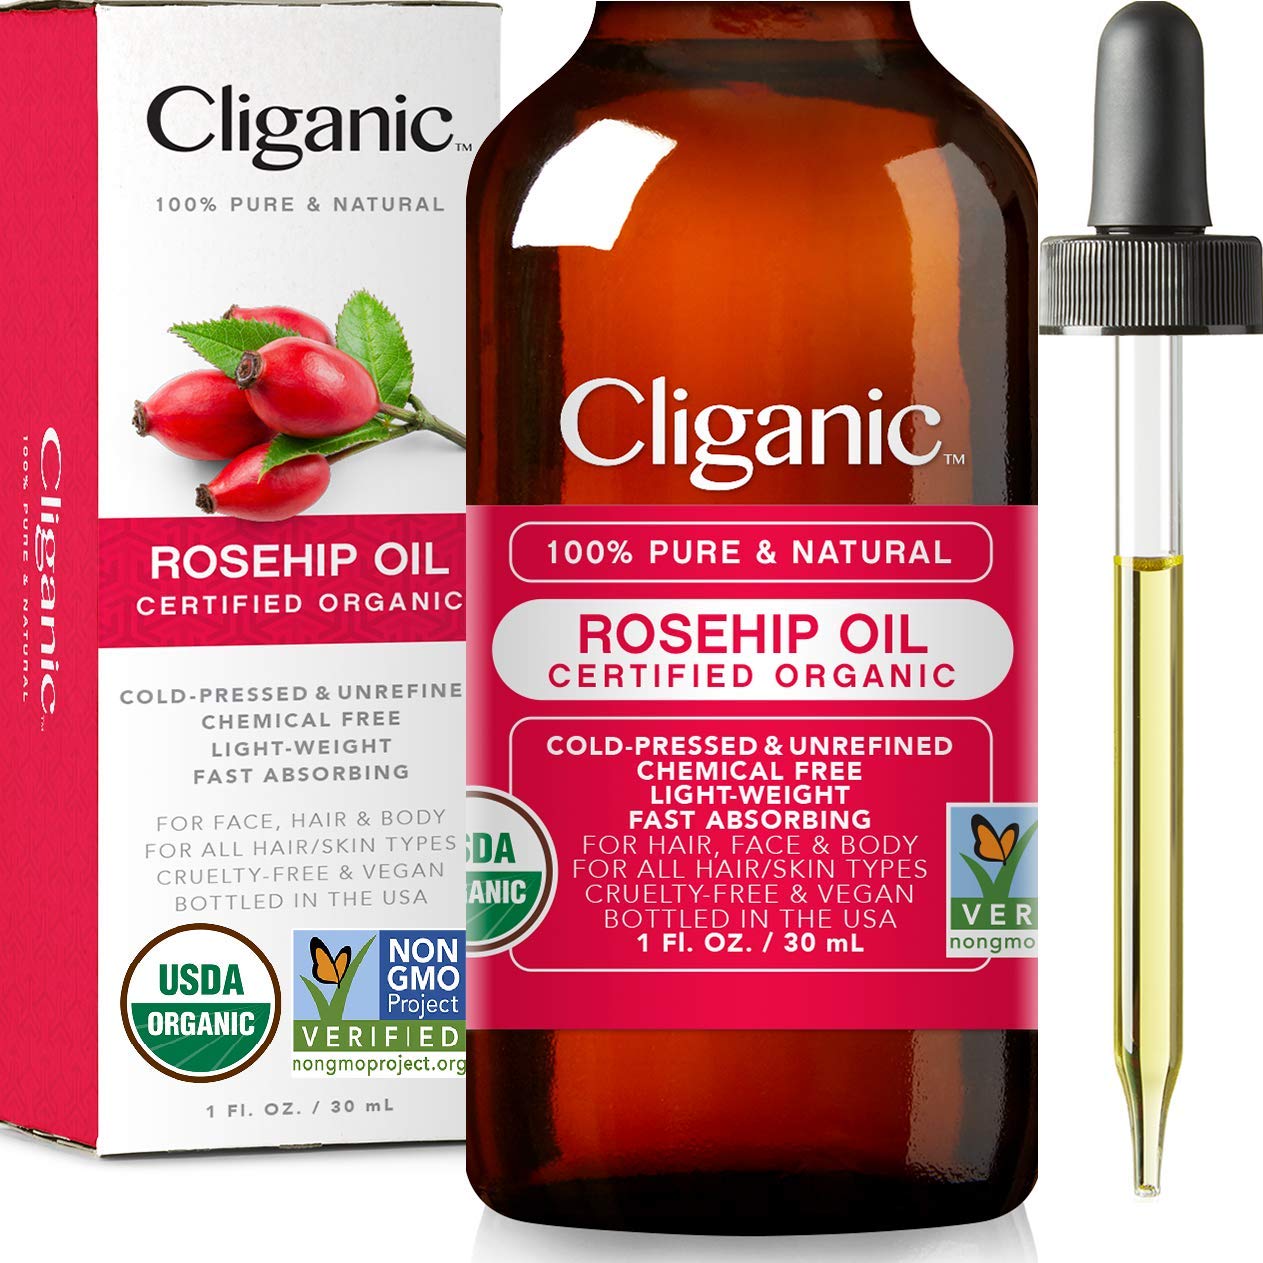 Cliganic - Essential Oils, Natural Skin Care and more!